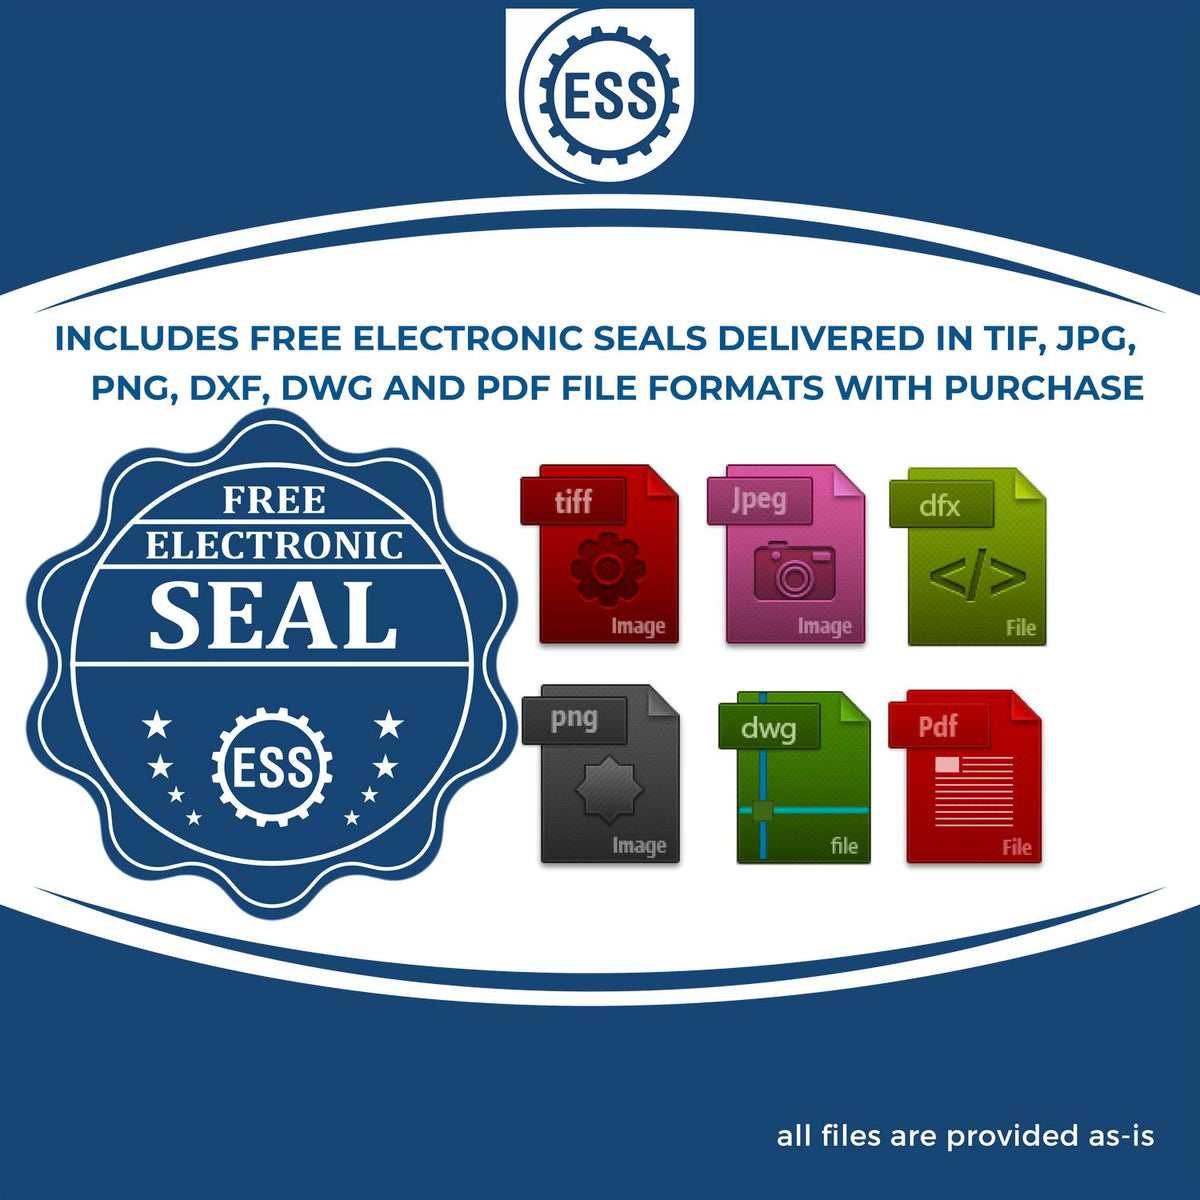 An infographic for the free electronic seal for the Hybrid Alaska Engineer Seal illustrating the different file type icons such as DXF, DWG, TIF, JPG and PNG.